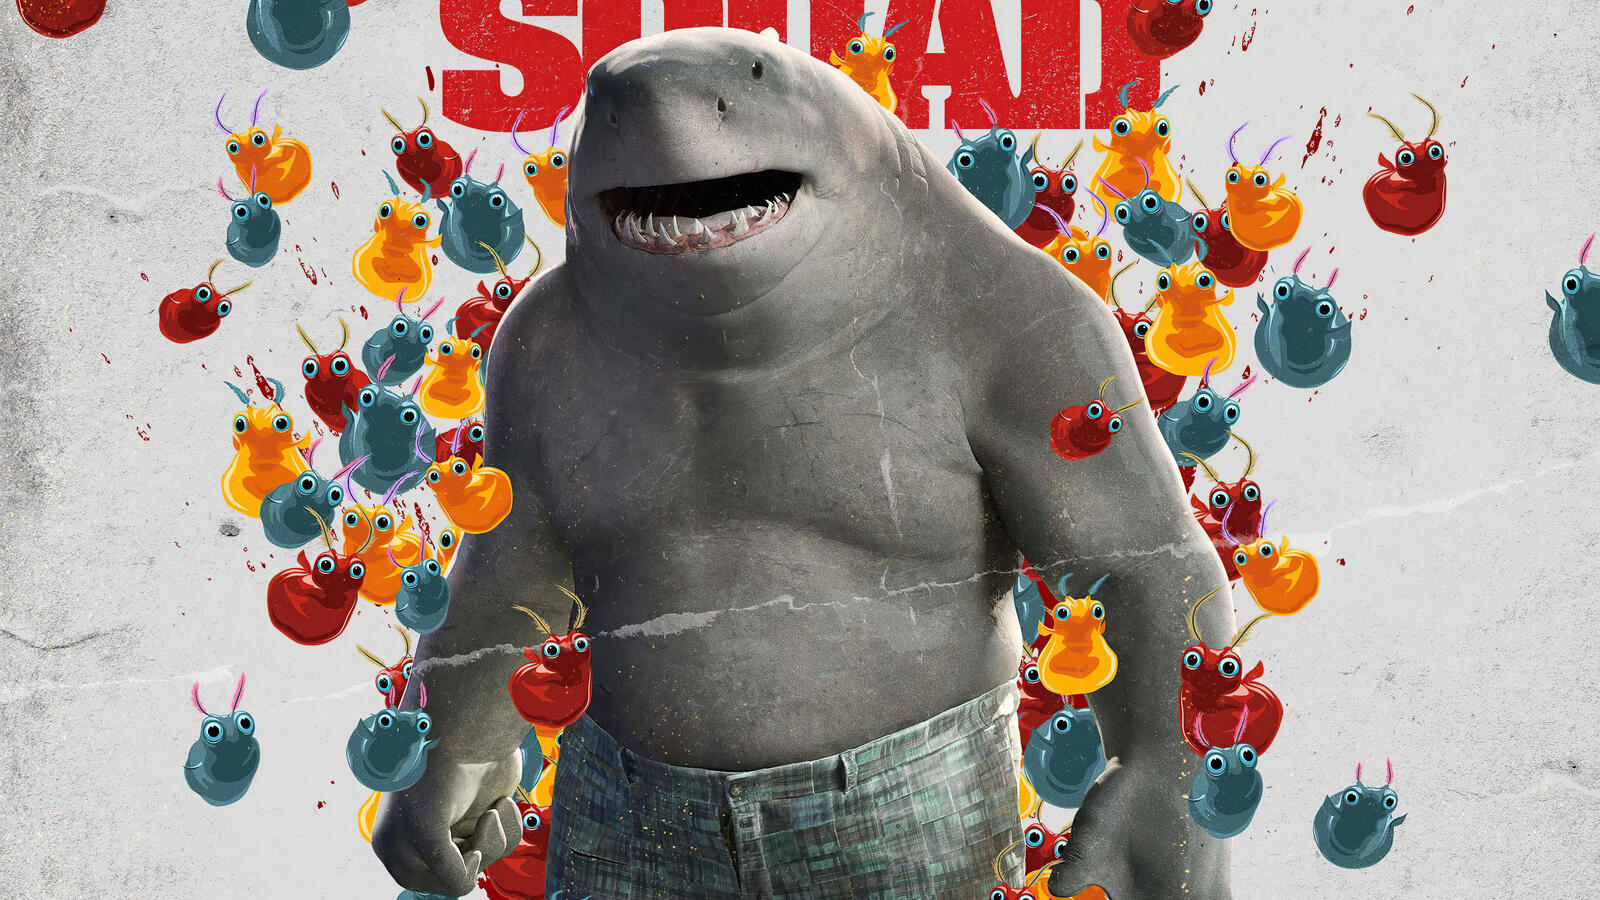 Wallpapers movies King Shark The Suicide Squad on the desktop